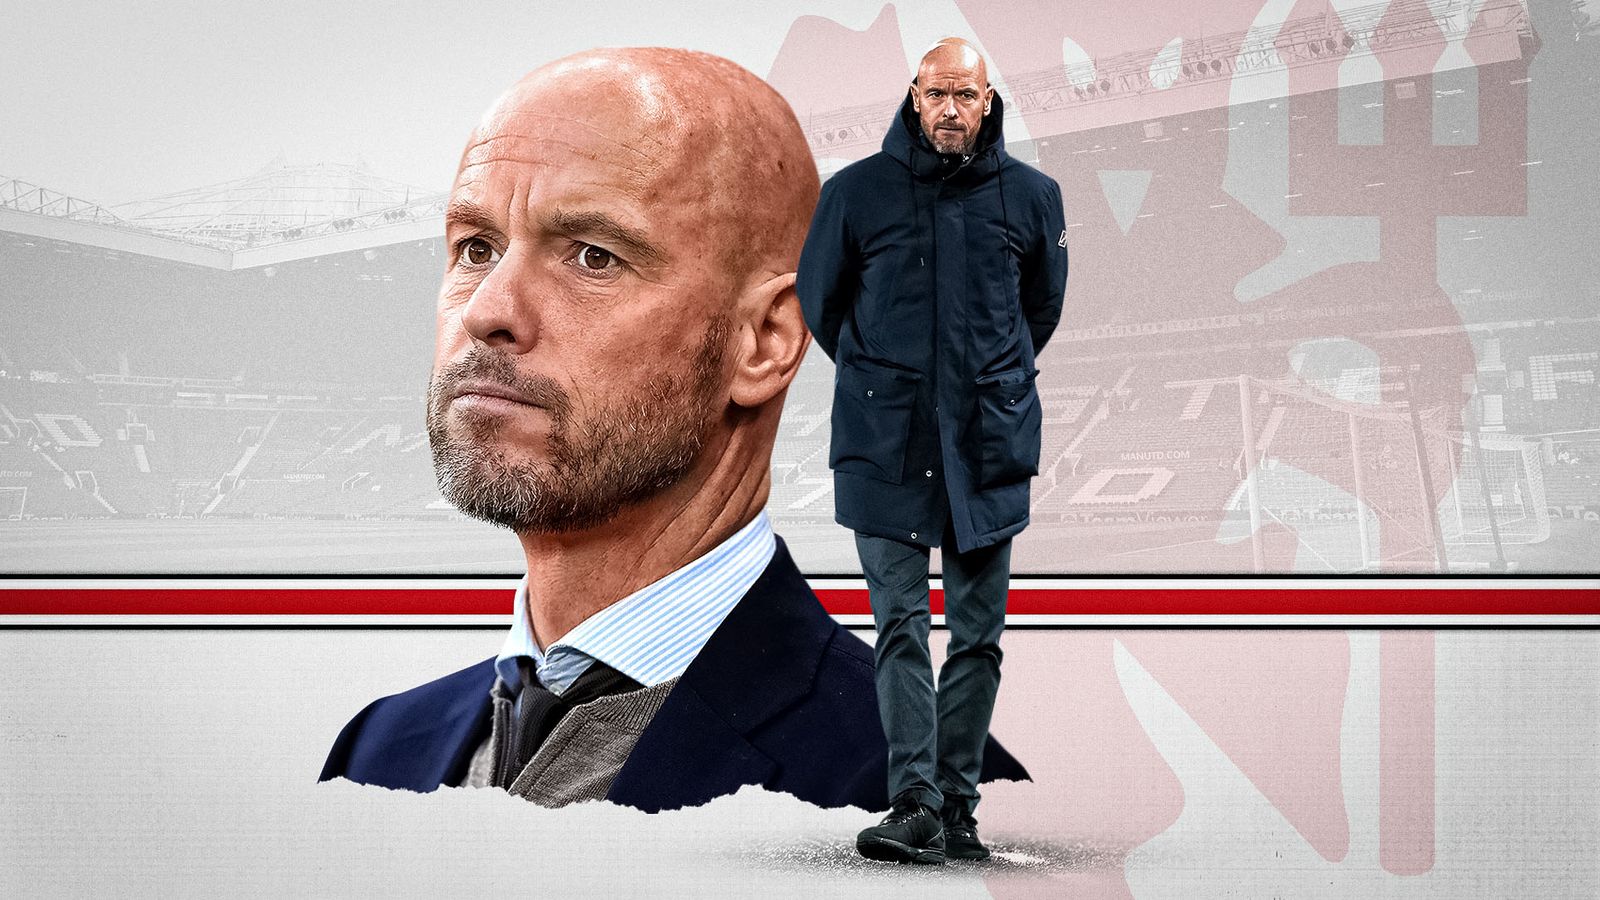 Manchester United transfers: Erik ten Hag looking to the Eredivisie and former Ajax stars to rebuild the club